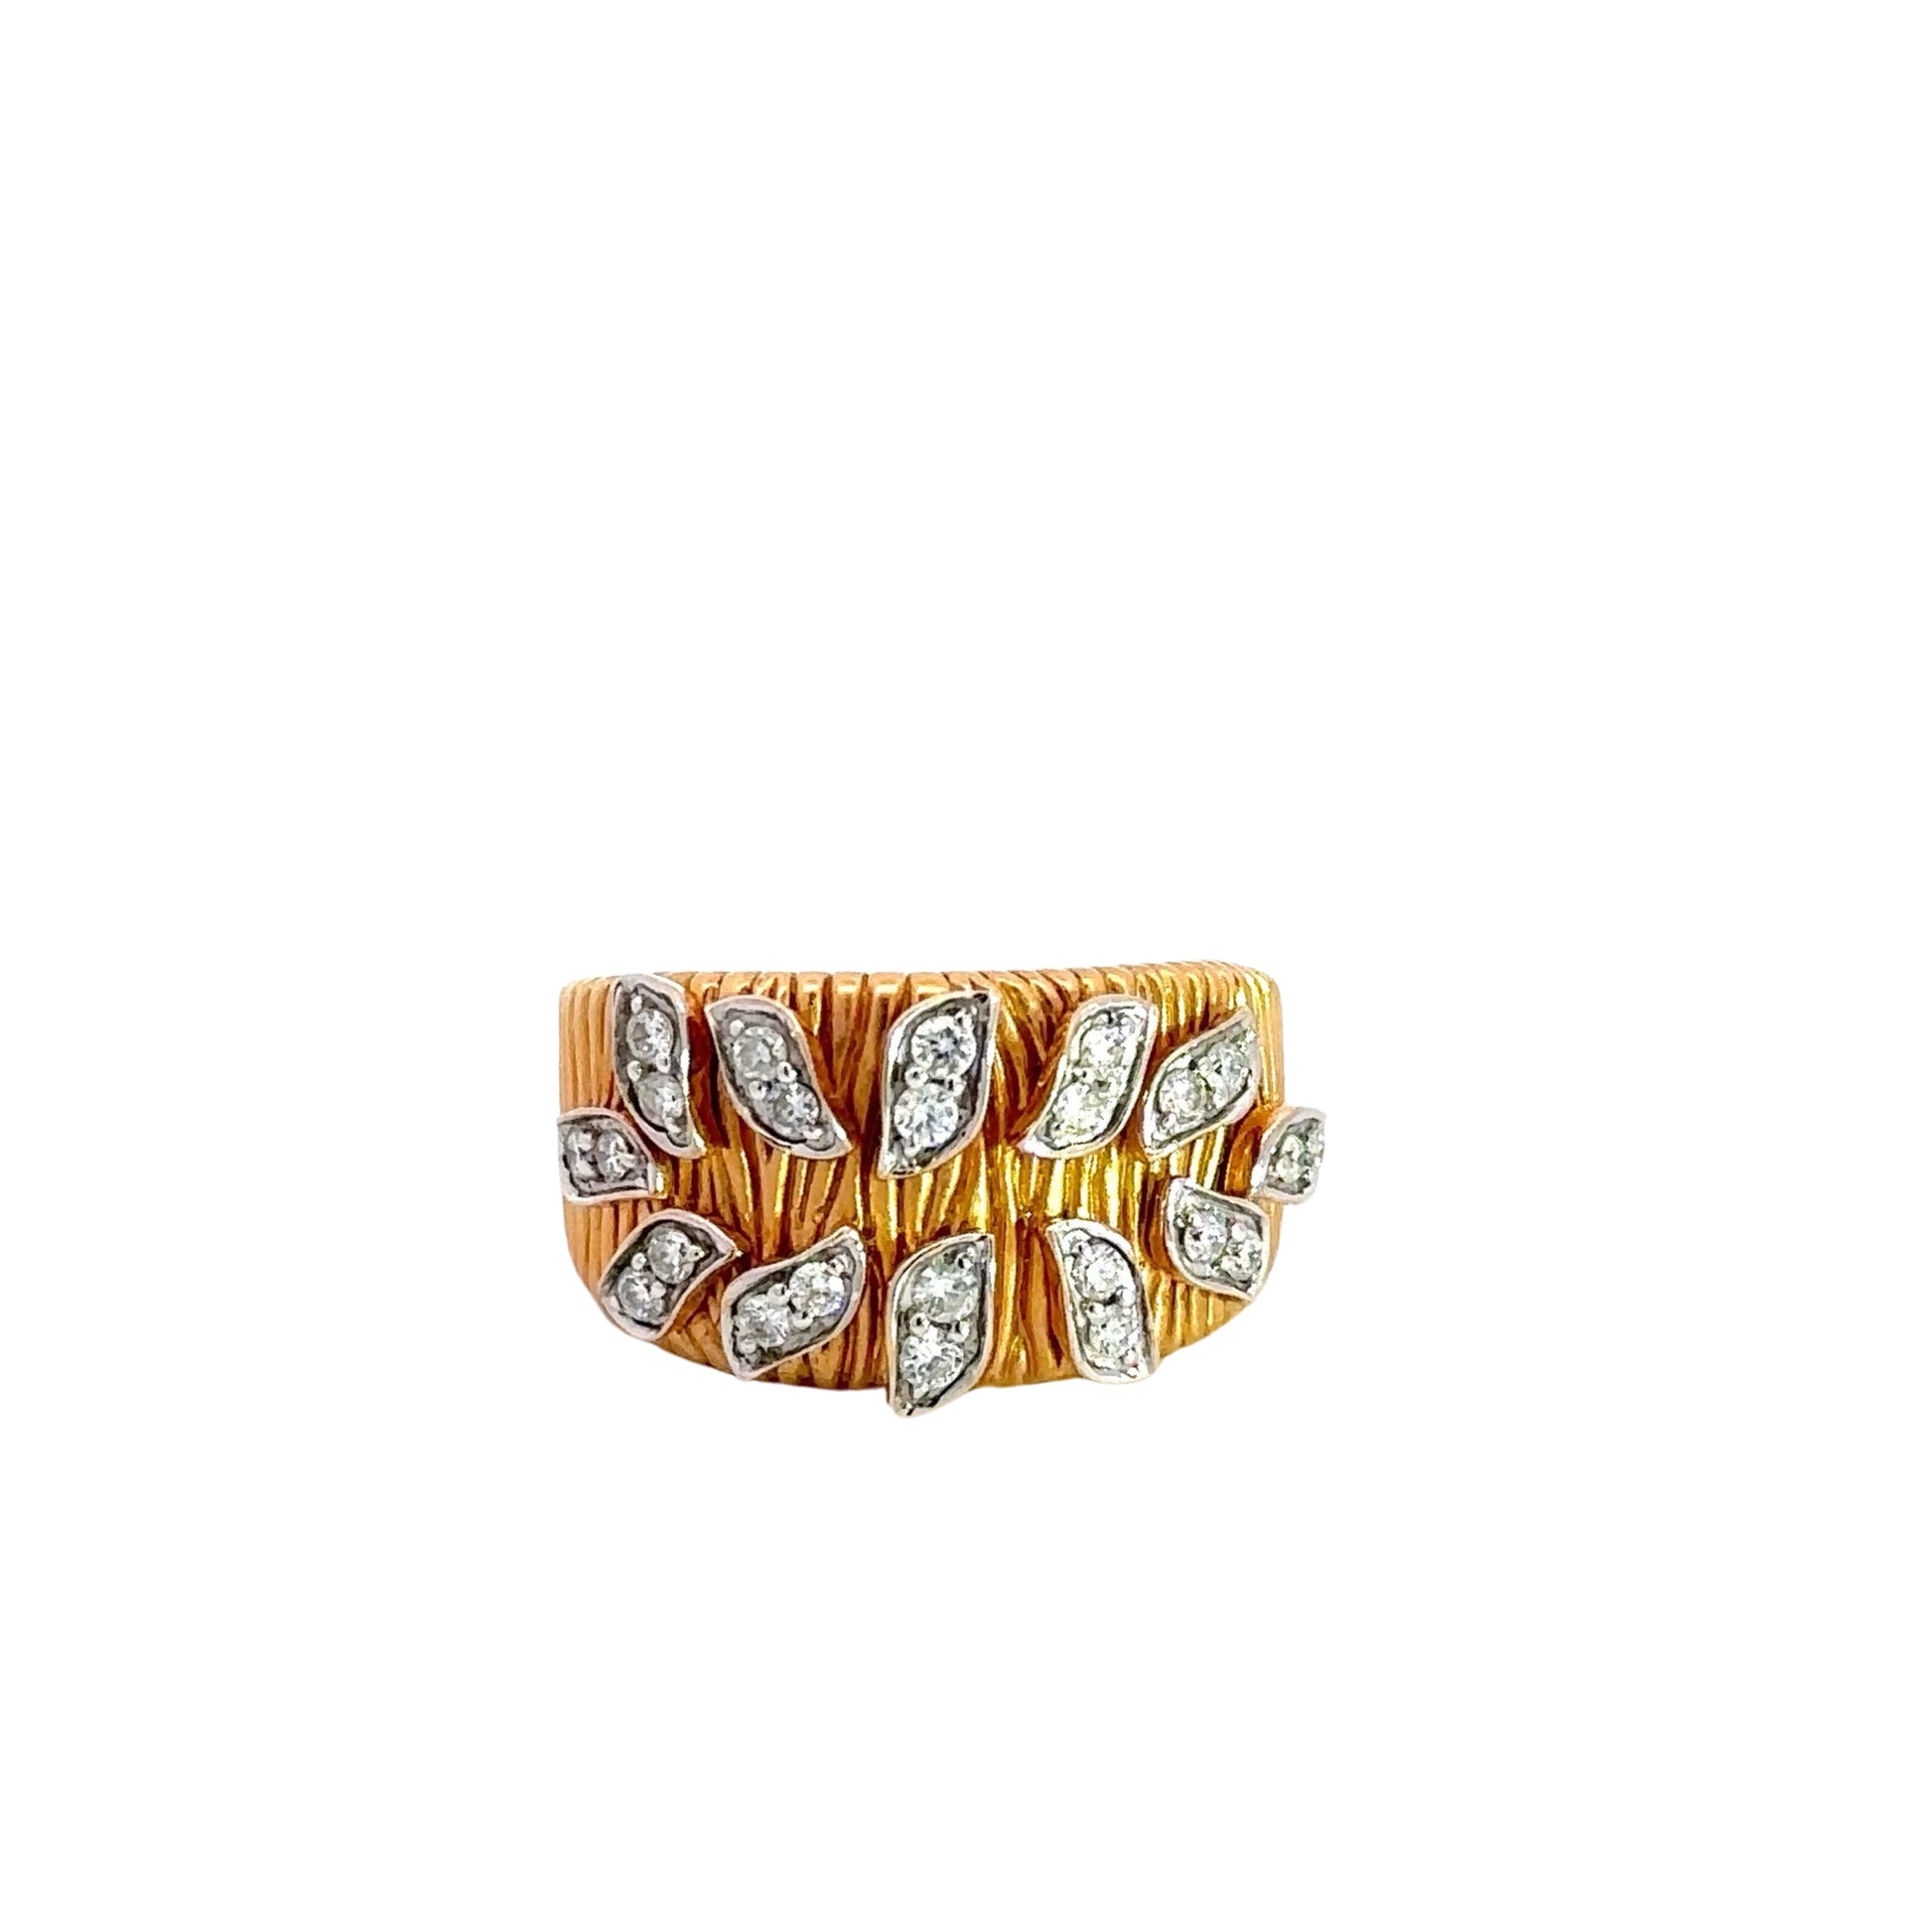 Front of ring with 24 Round Natural Diamonds in pairs of 2 on textured design gold